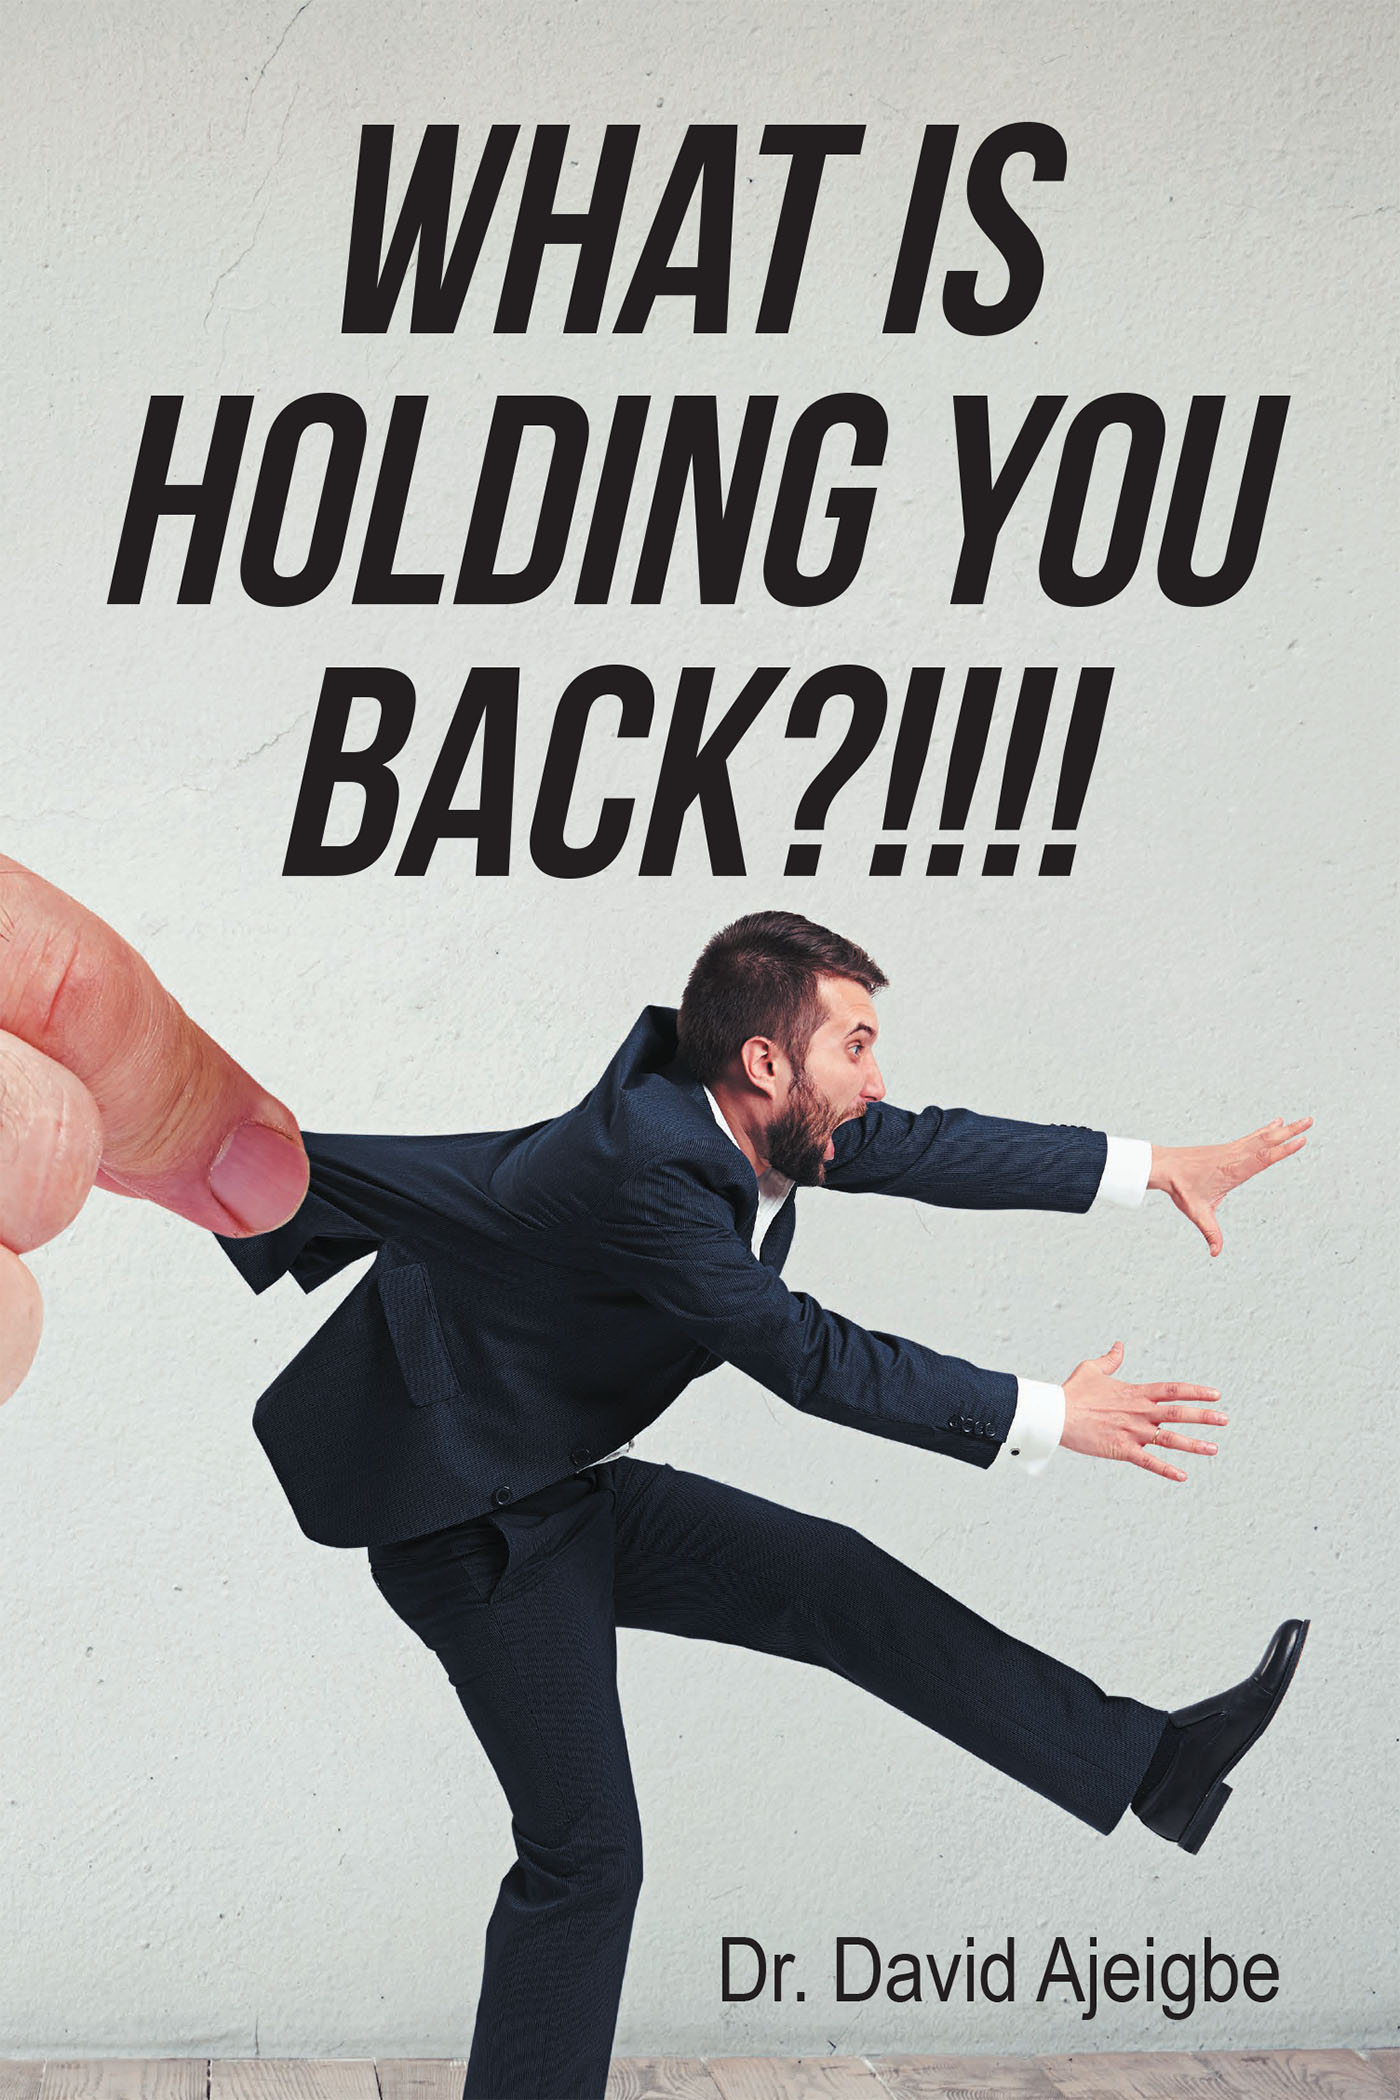 Author Dr. David Ajeigbe’s New Book, "What is Holding You Back?!!!!" is a Powerful Tool to Help Readers Overcome the Internal Hurdles to Achieving Their True Potential